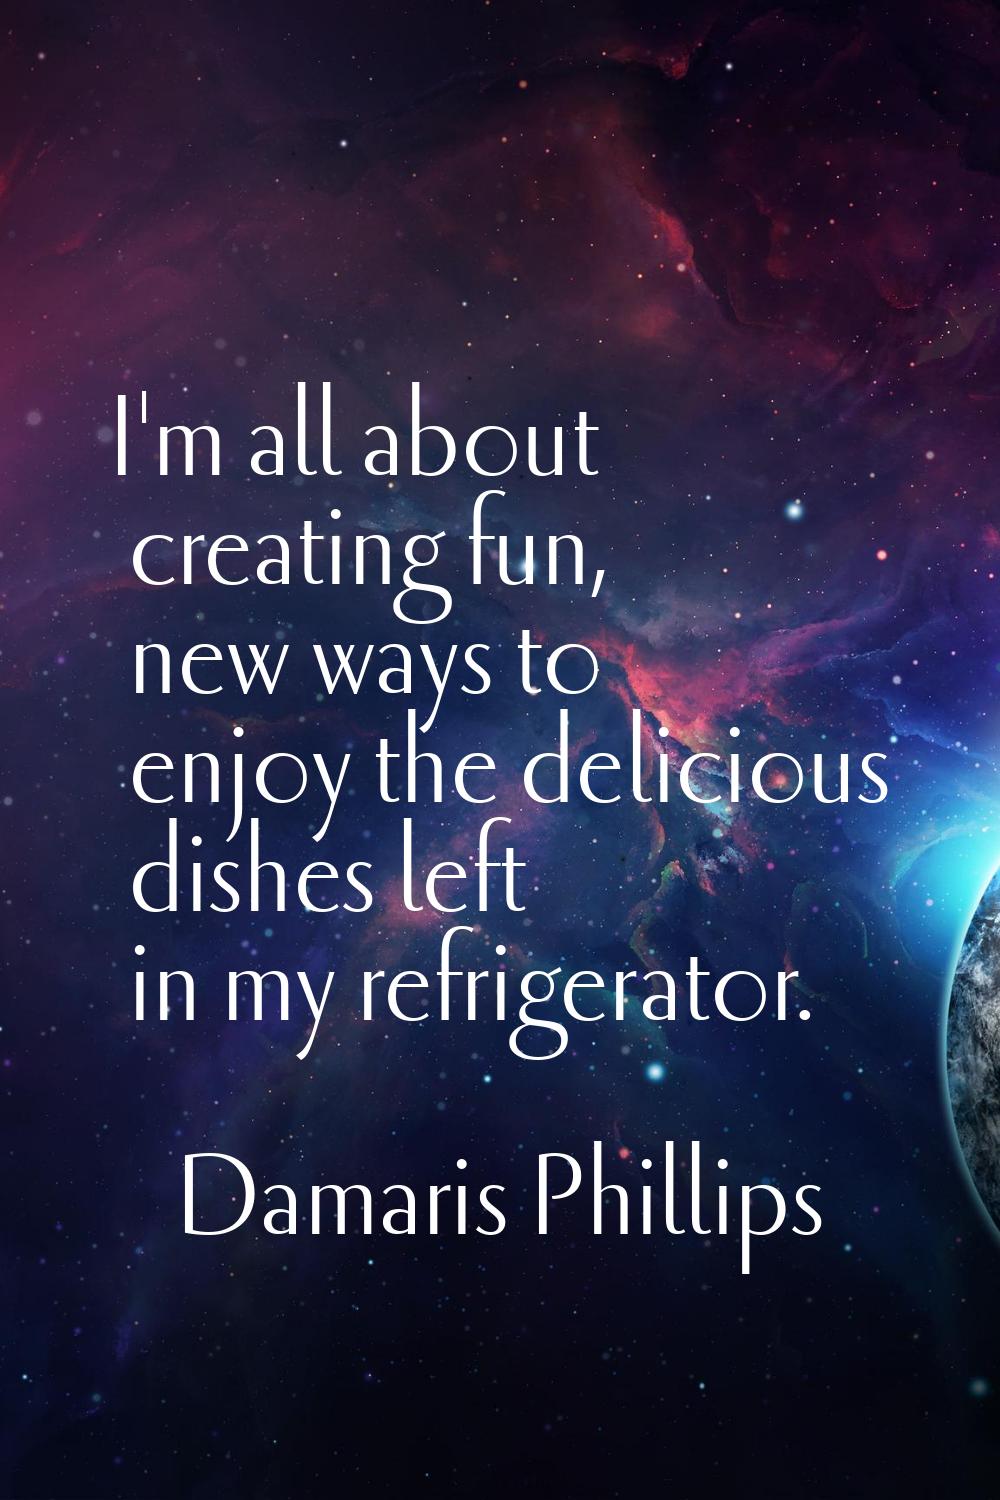 I'm all about creating fun, new ways to enjoy the delicious dishes left in my refrigerator.